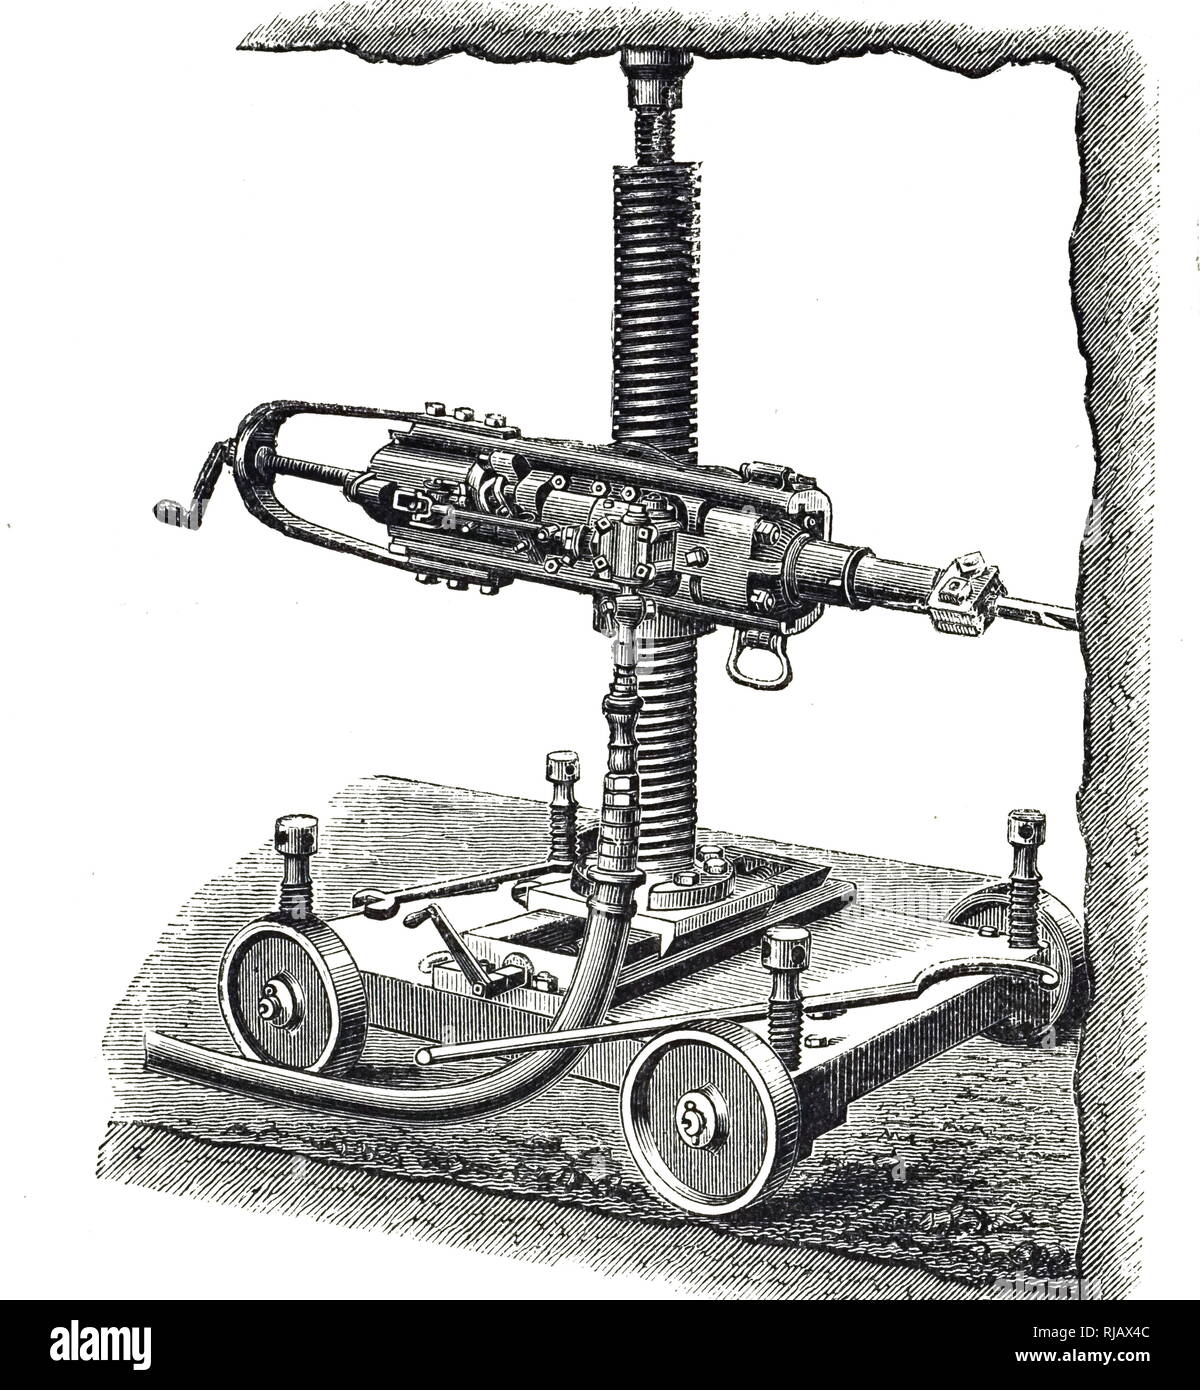 An engraving depicting a Burleigh rock drill mounted on a marble stand. Dated 19th century Stock Photo